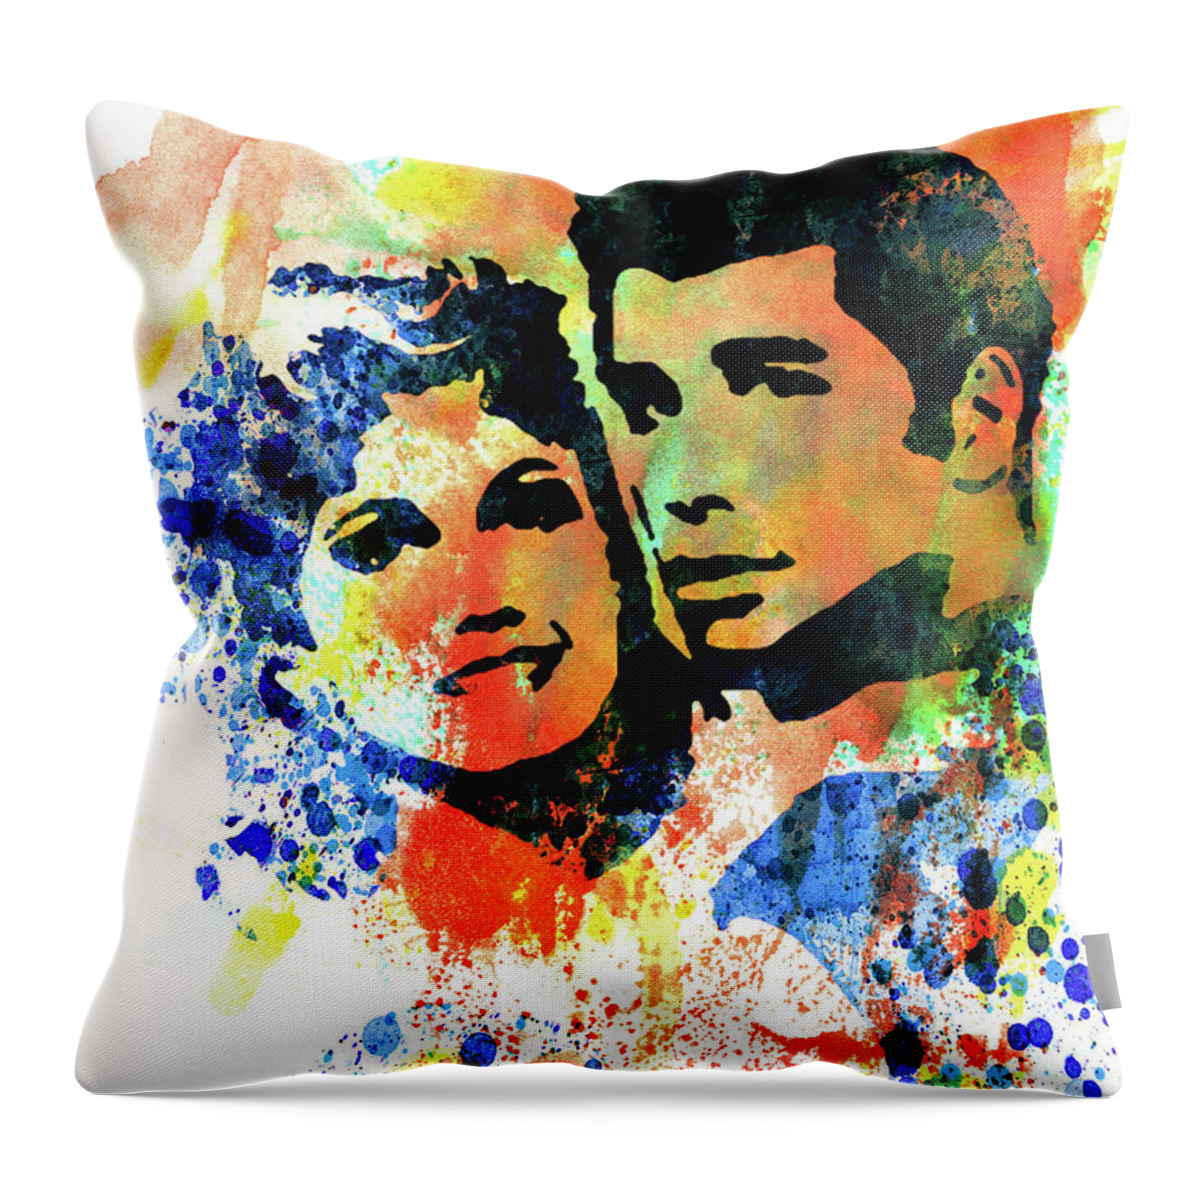 Grease Throw Pillow featuring the mixed media Legendary Grease Watercolor by Naxart Studio